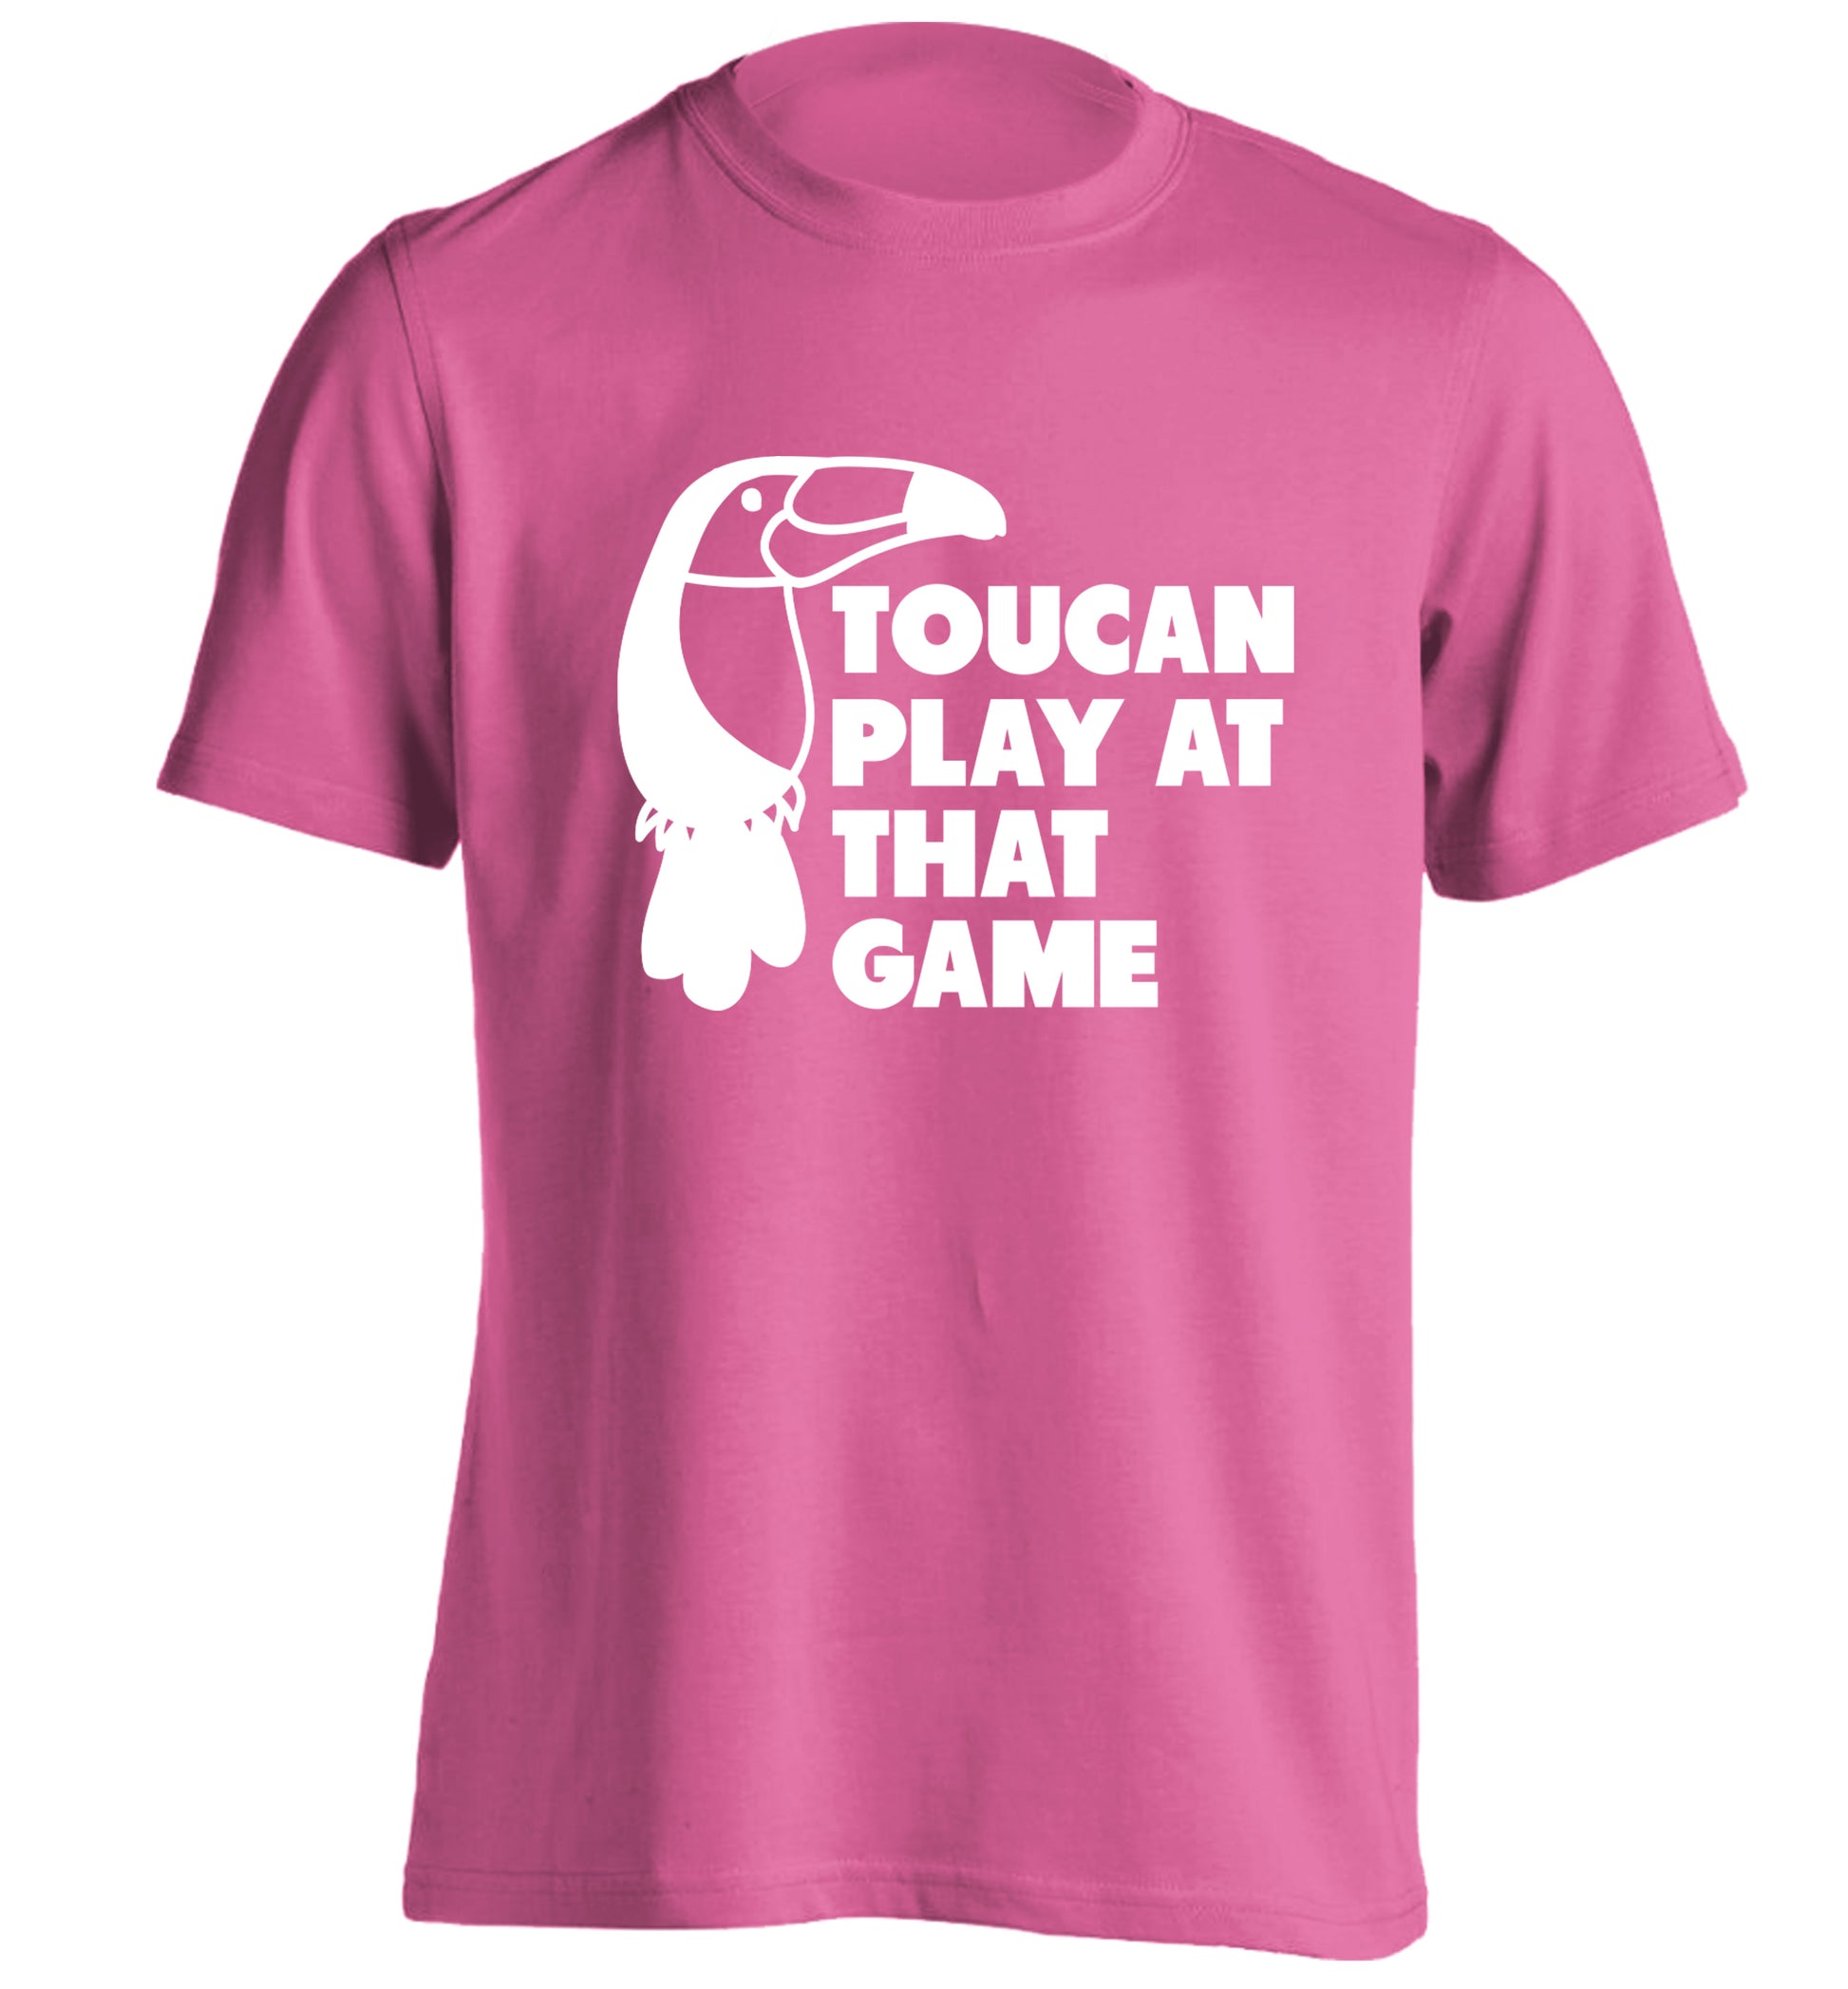 Toucan play at that game adults unisex pink Tshirt 2XL